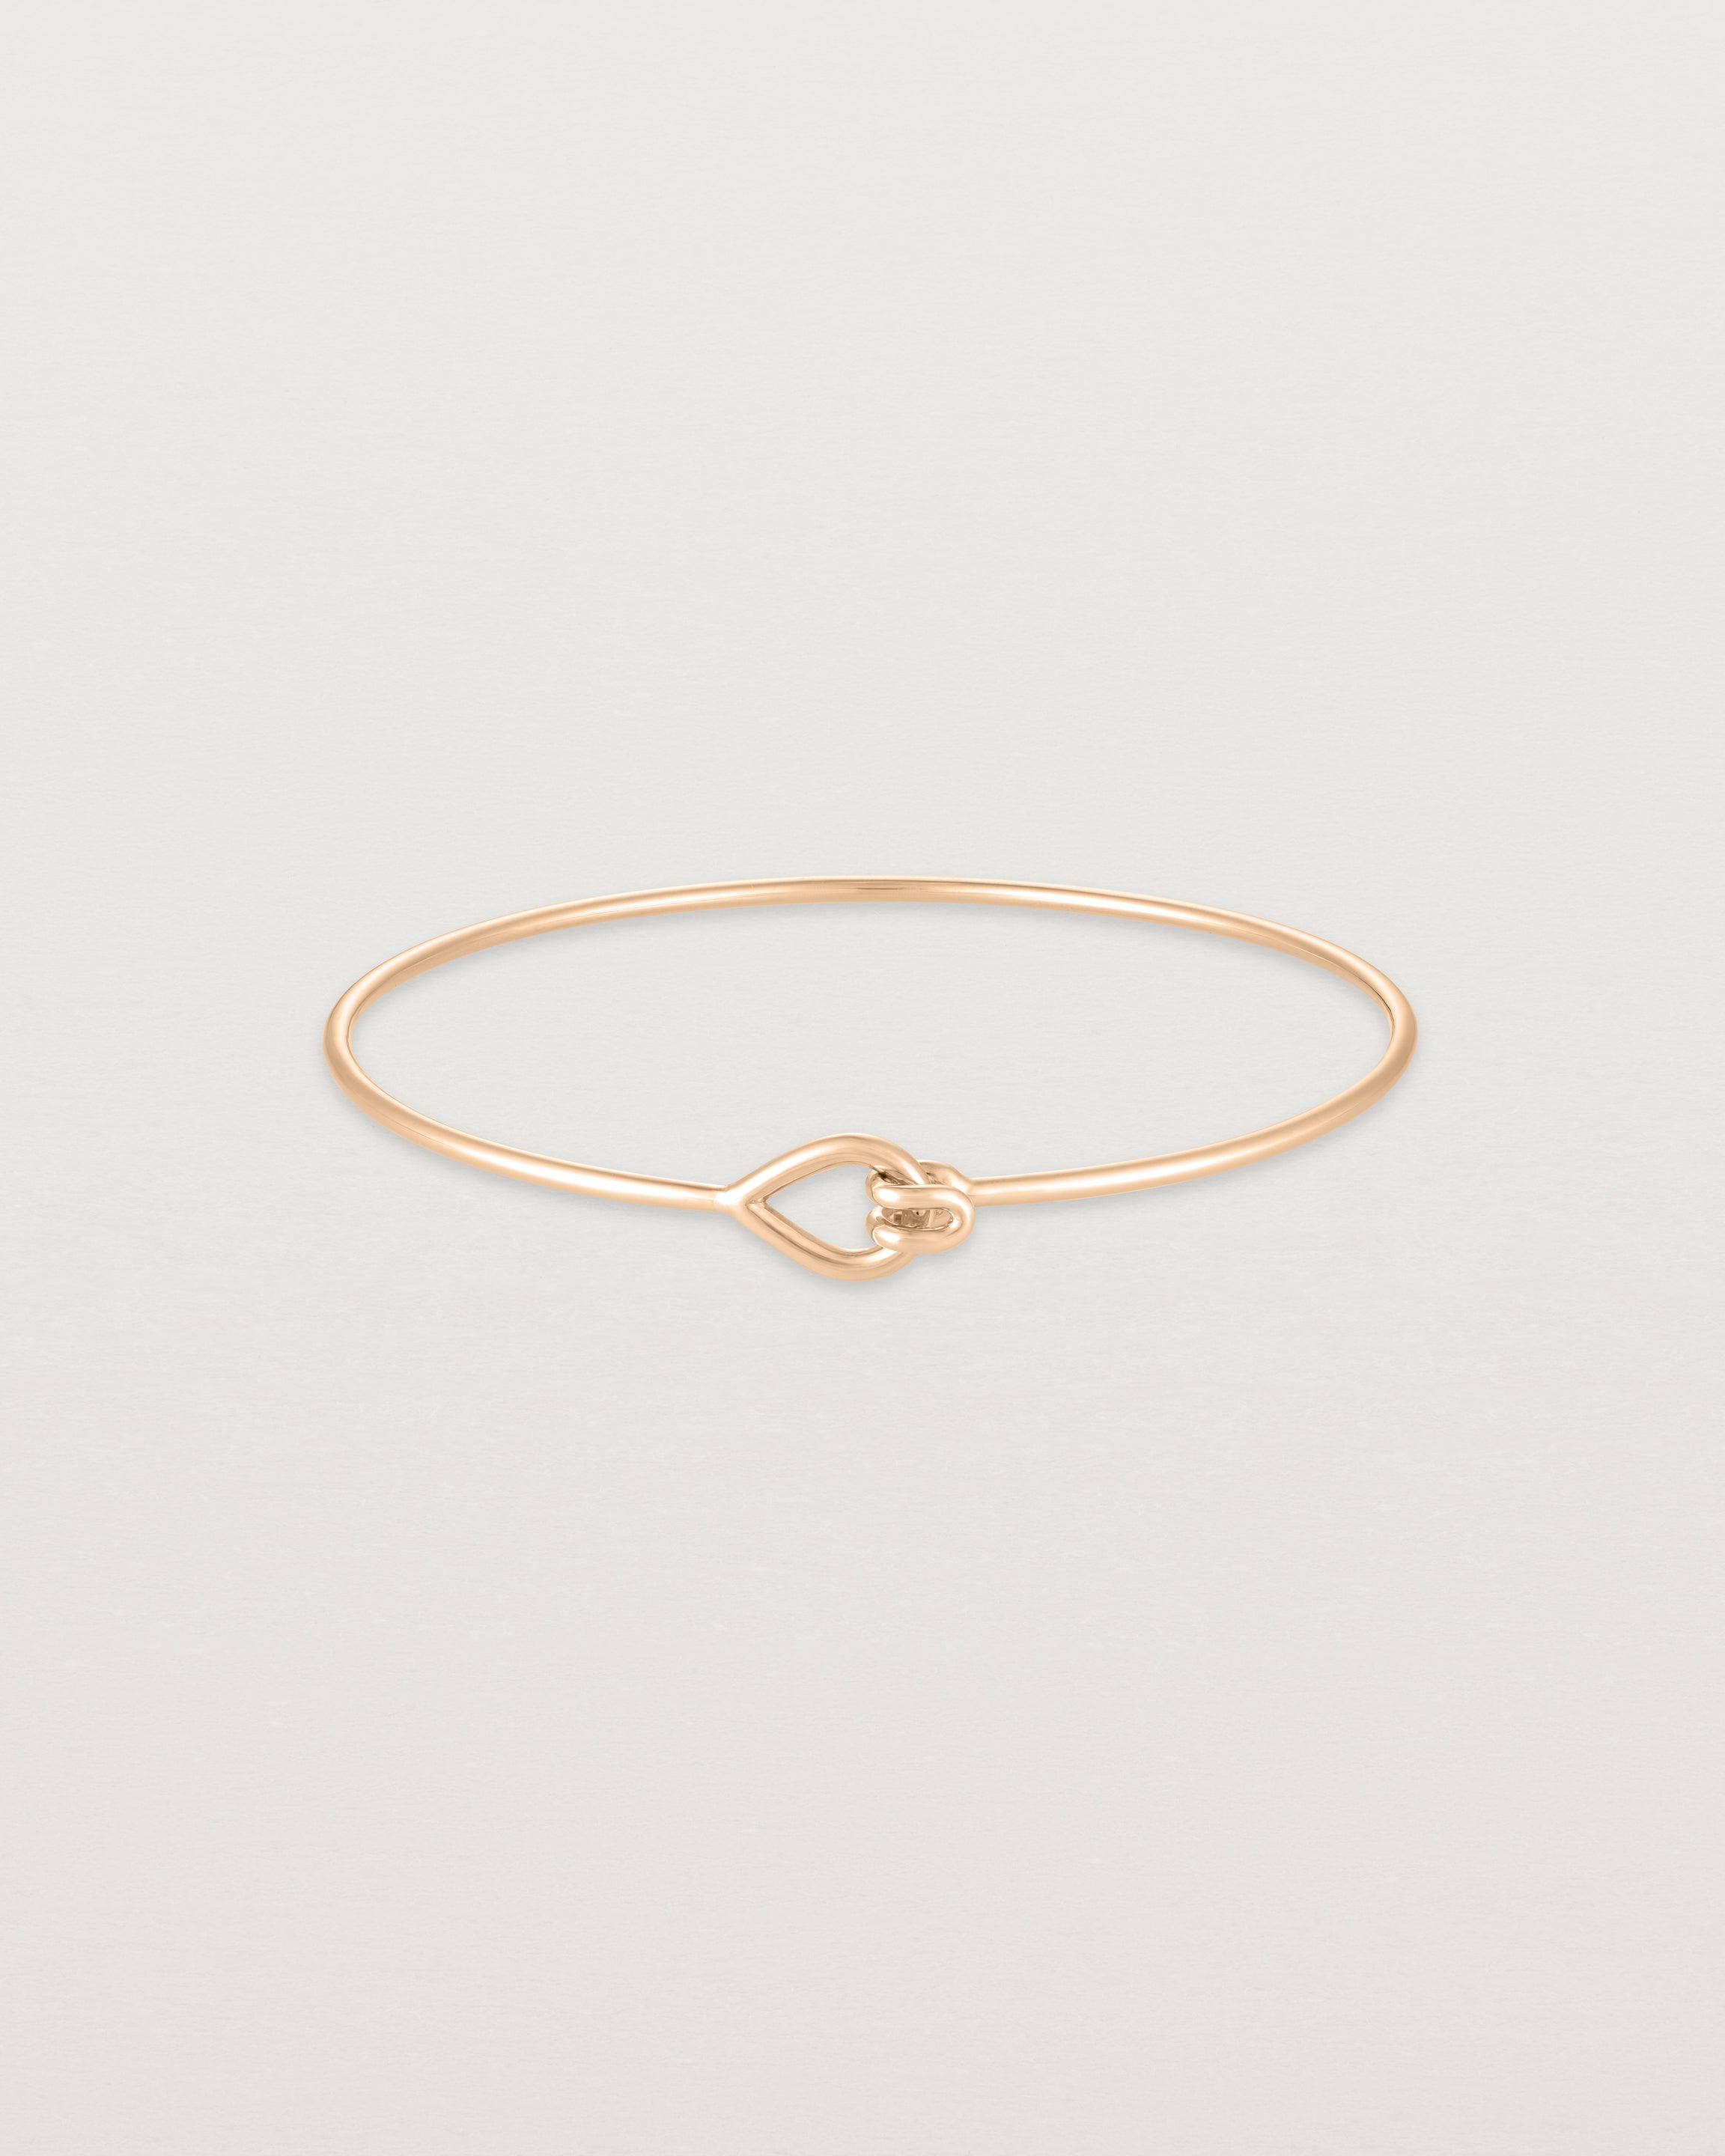 Front view of the Oana Bangle in rose gold.